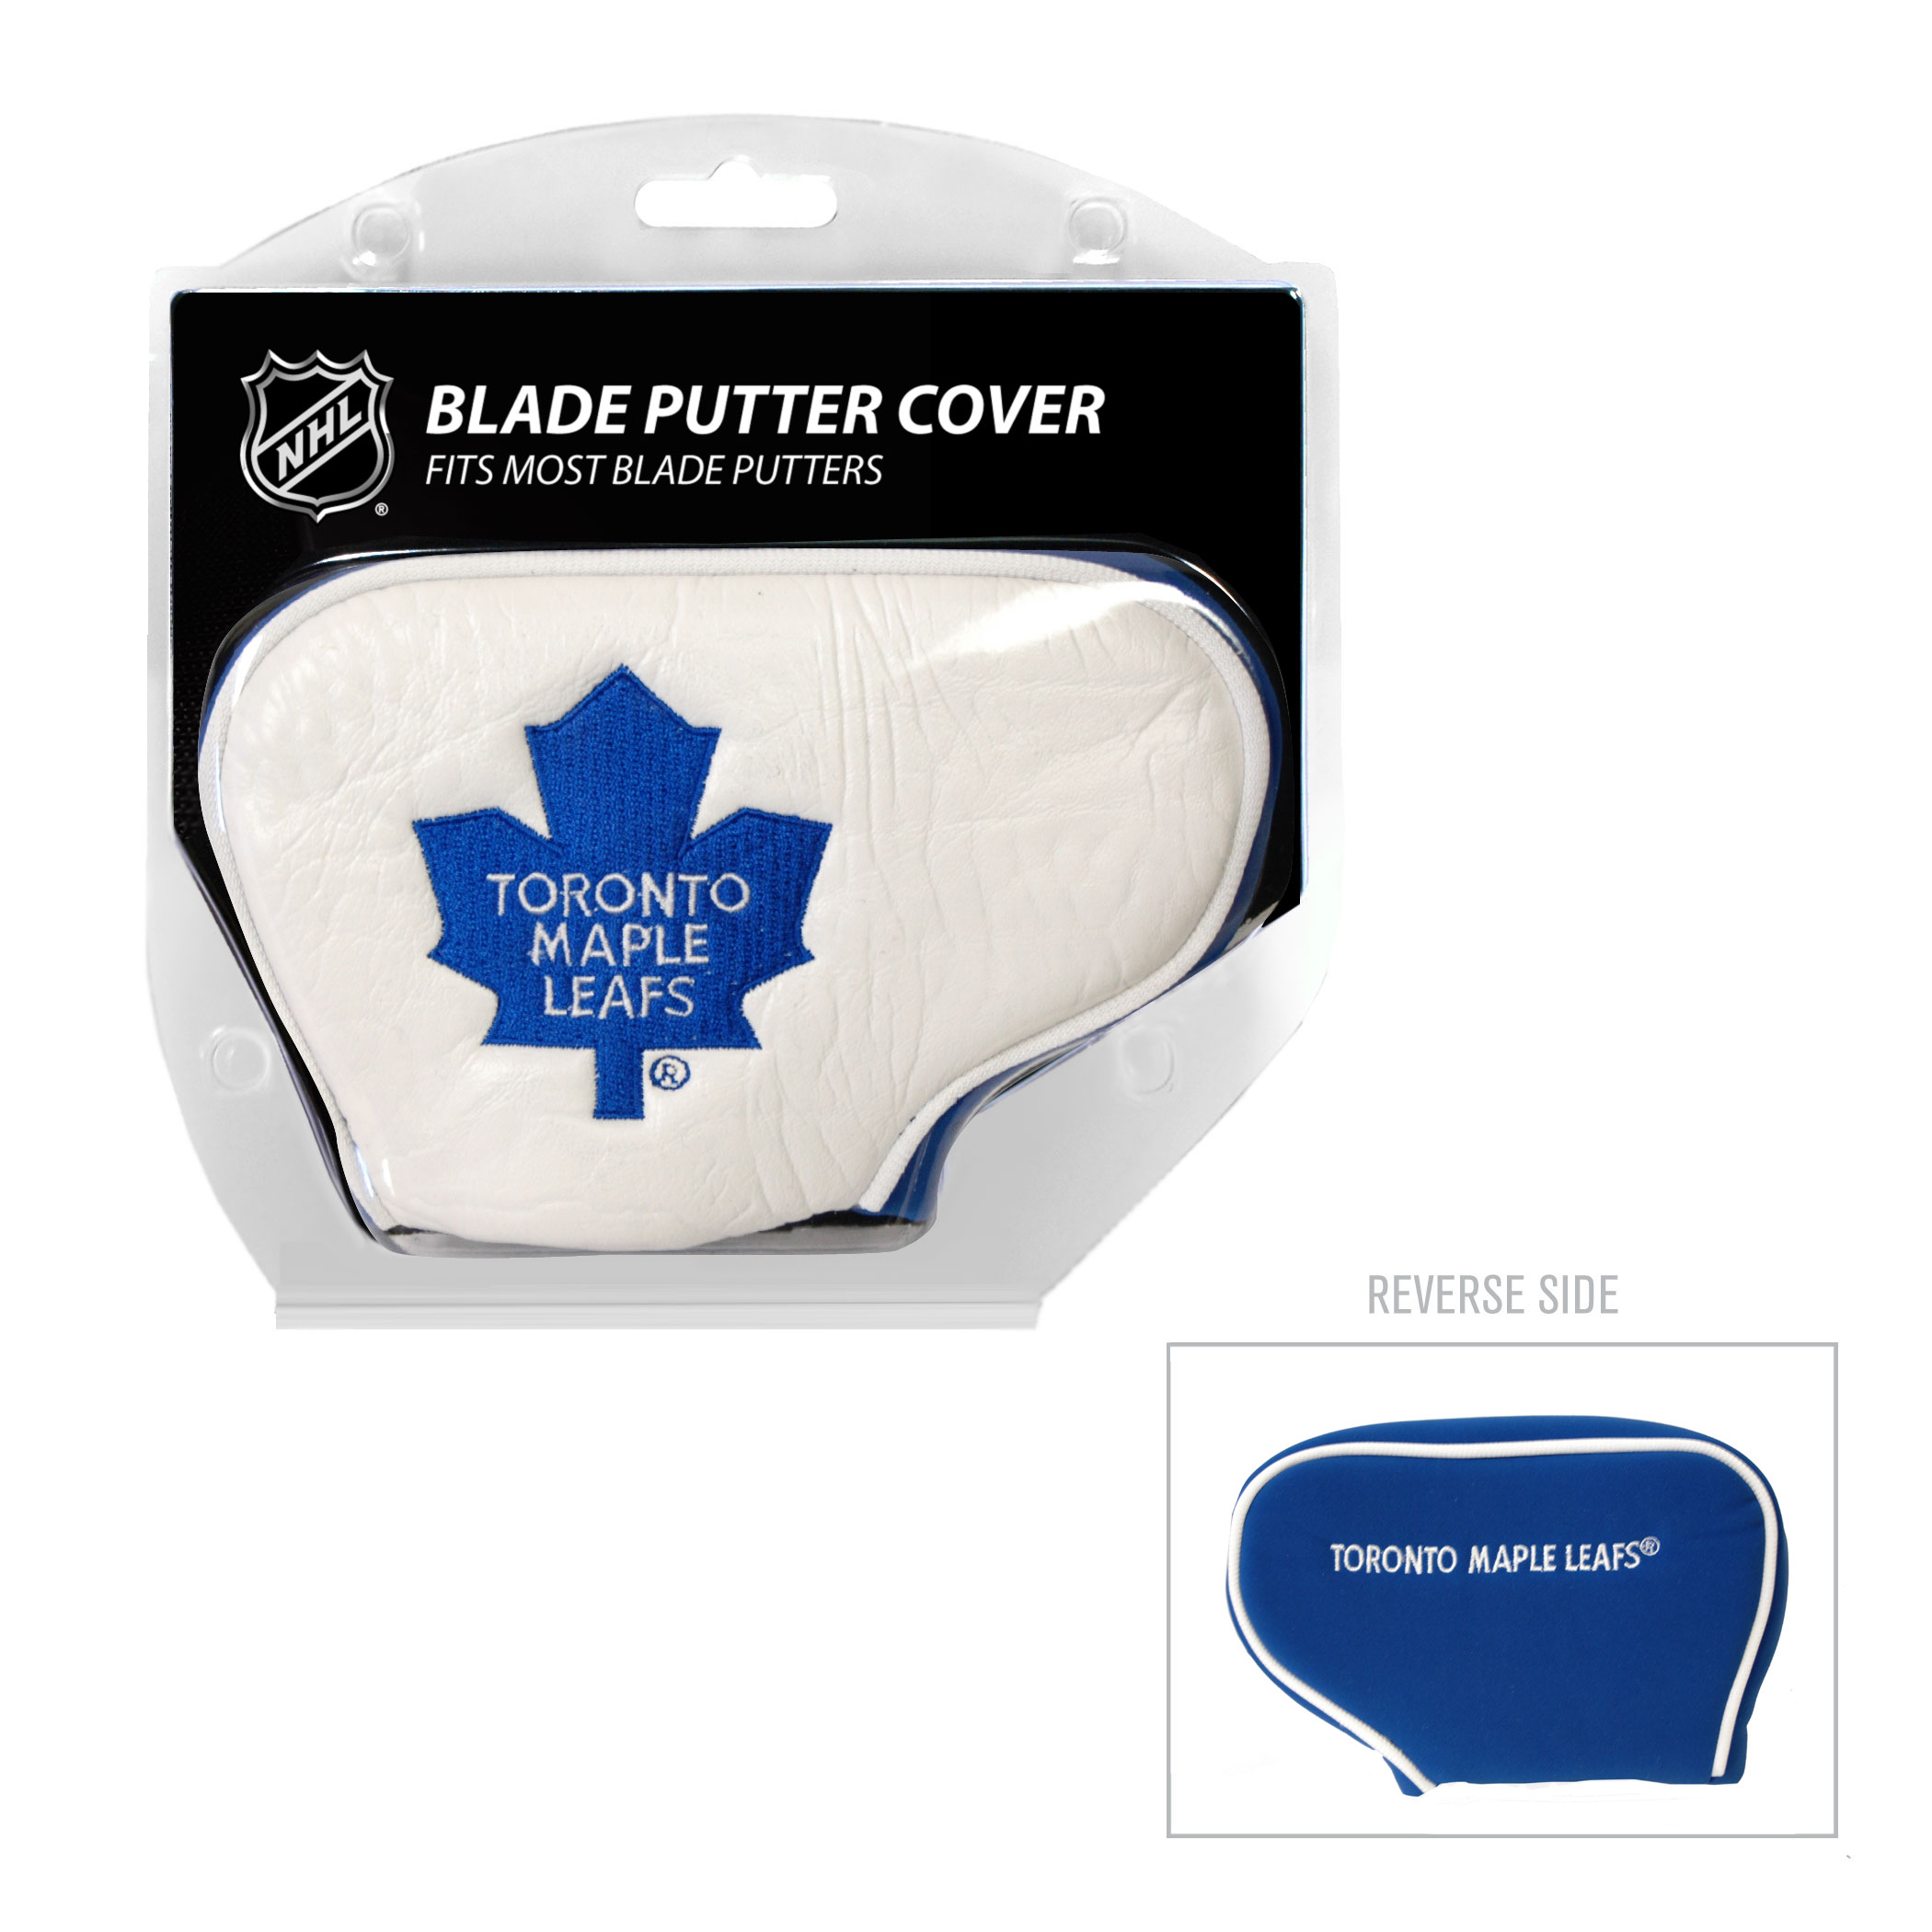 Toronto Maple Leafs Blade Putter Cover